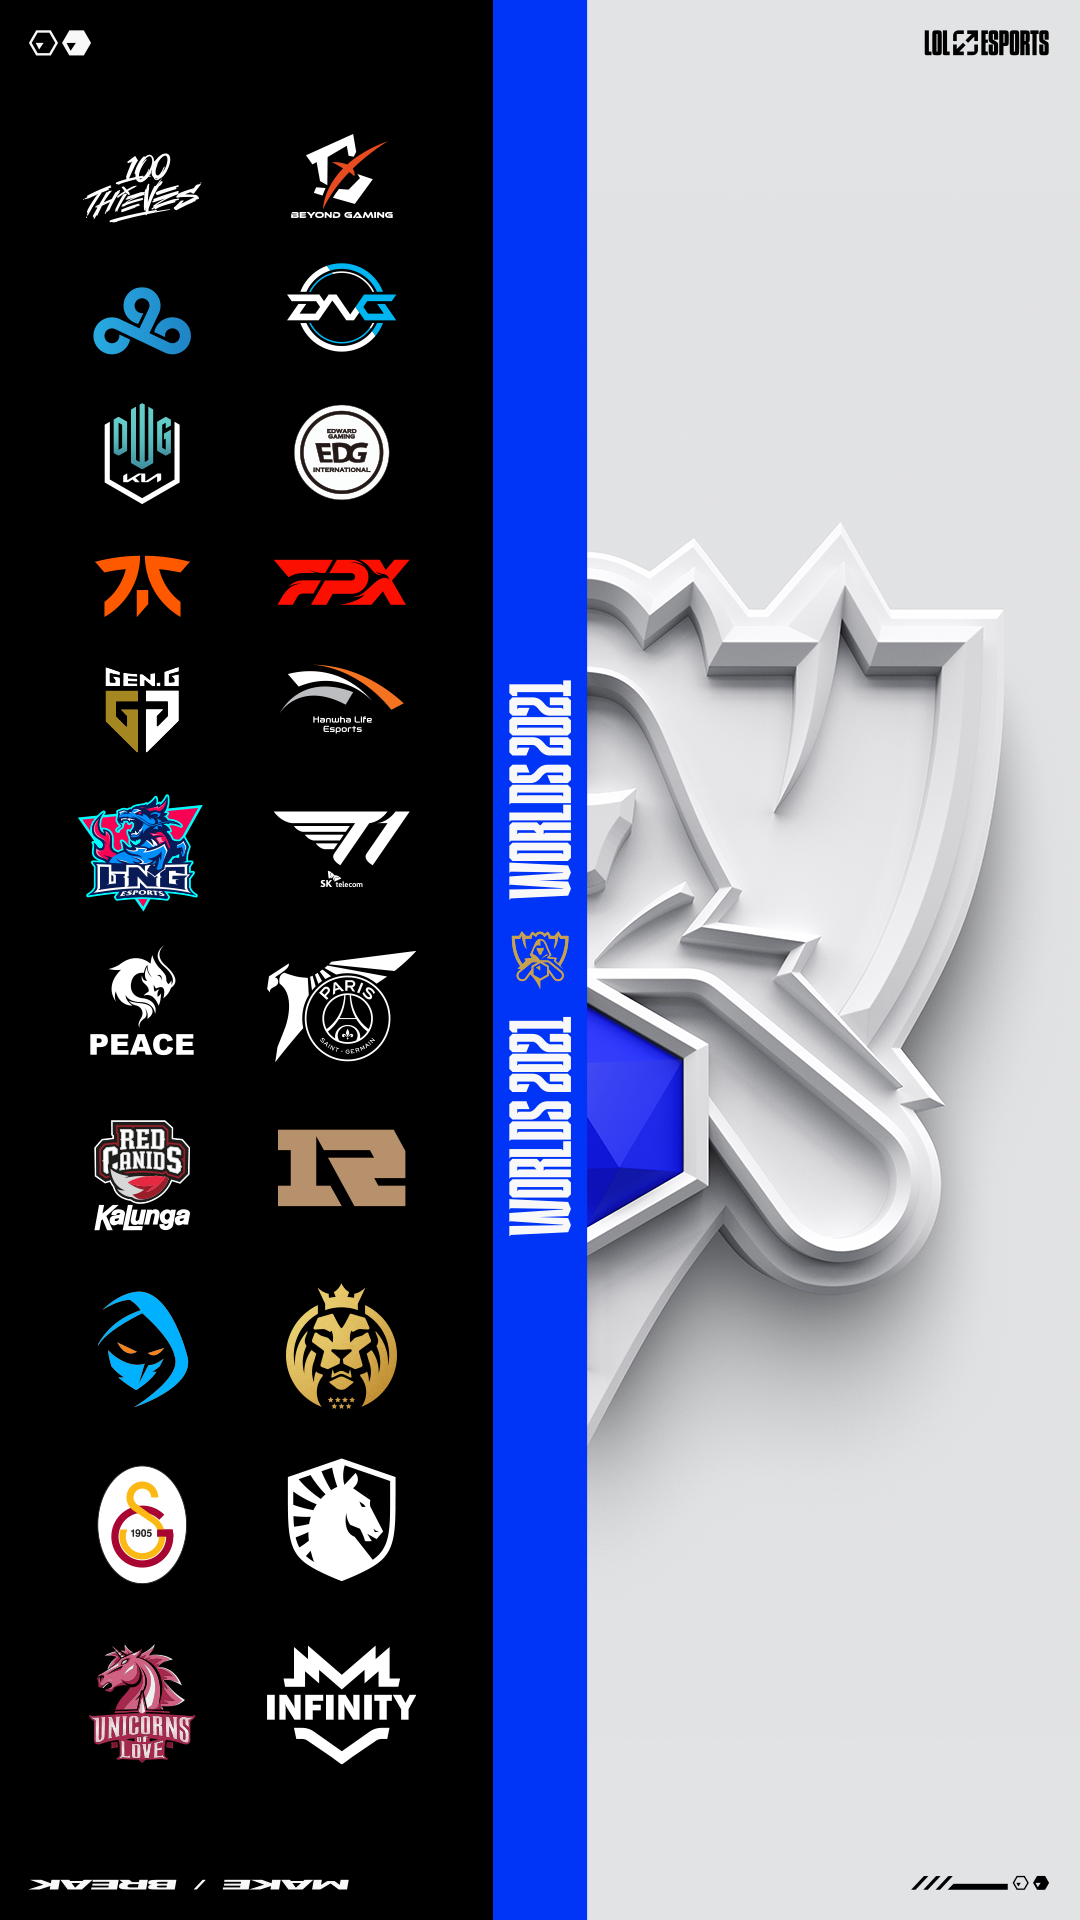 Photo: league of legends worlds qualified teams